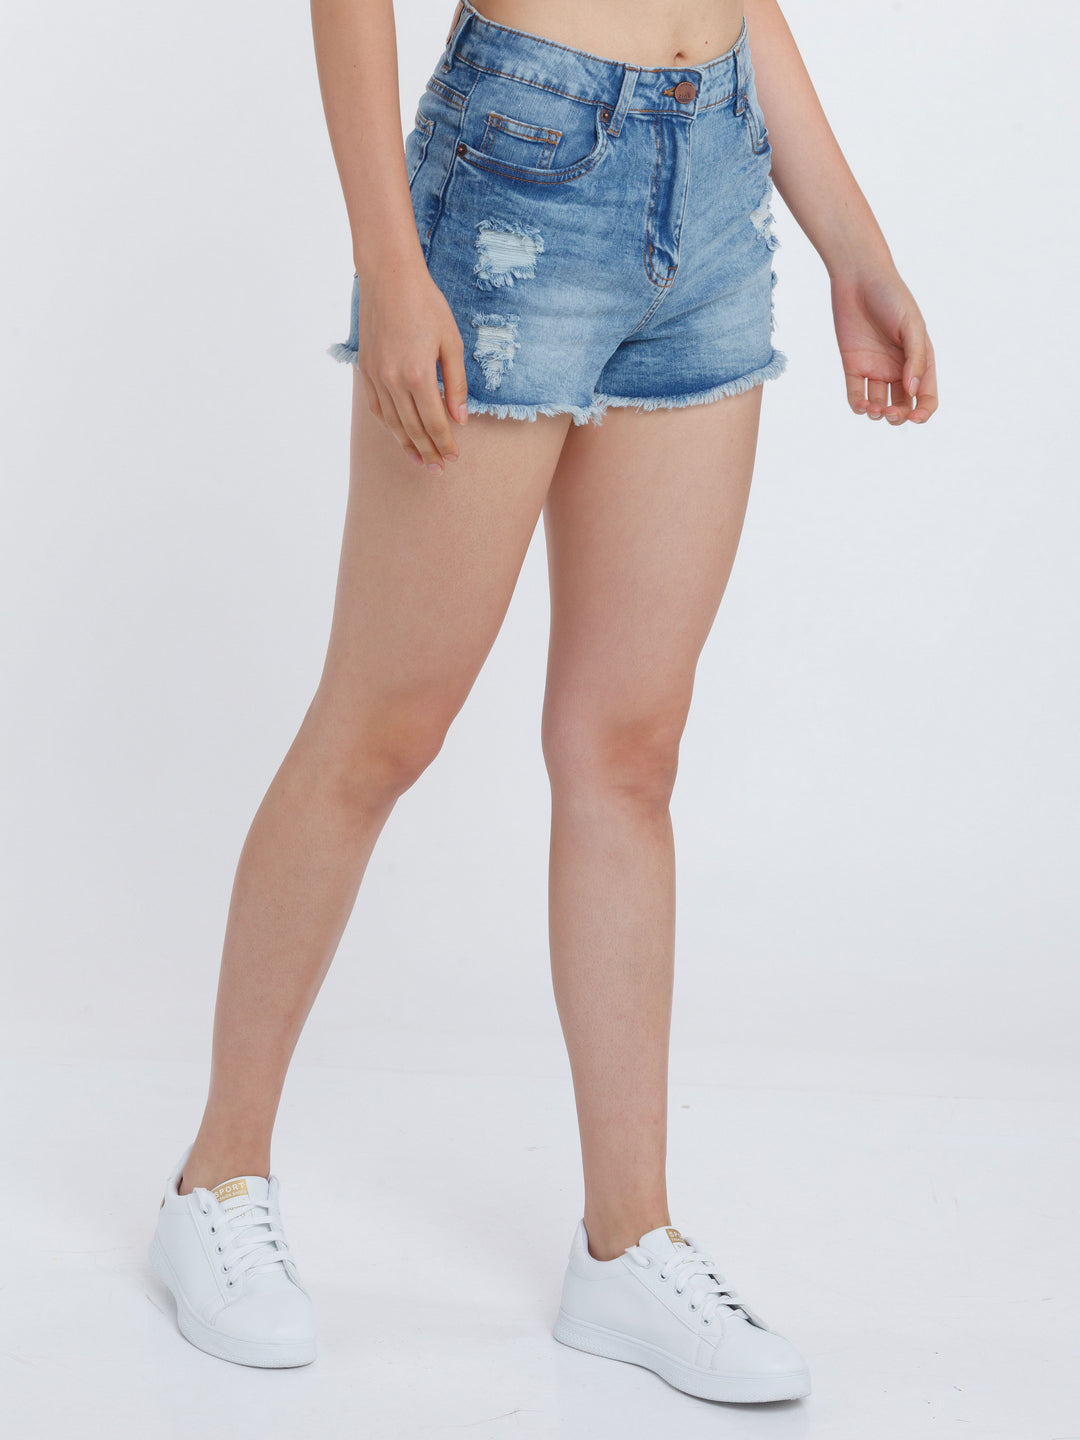 Blue Solid Distressed Jeans Shorts For Women